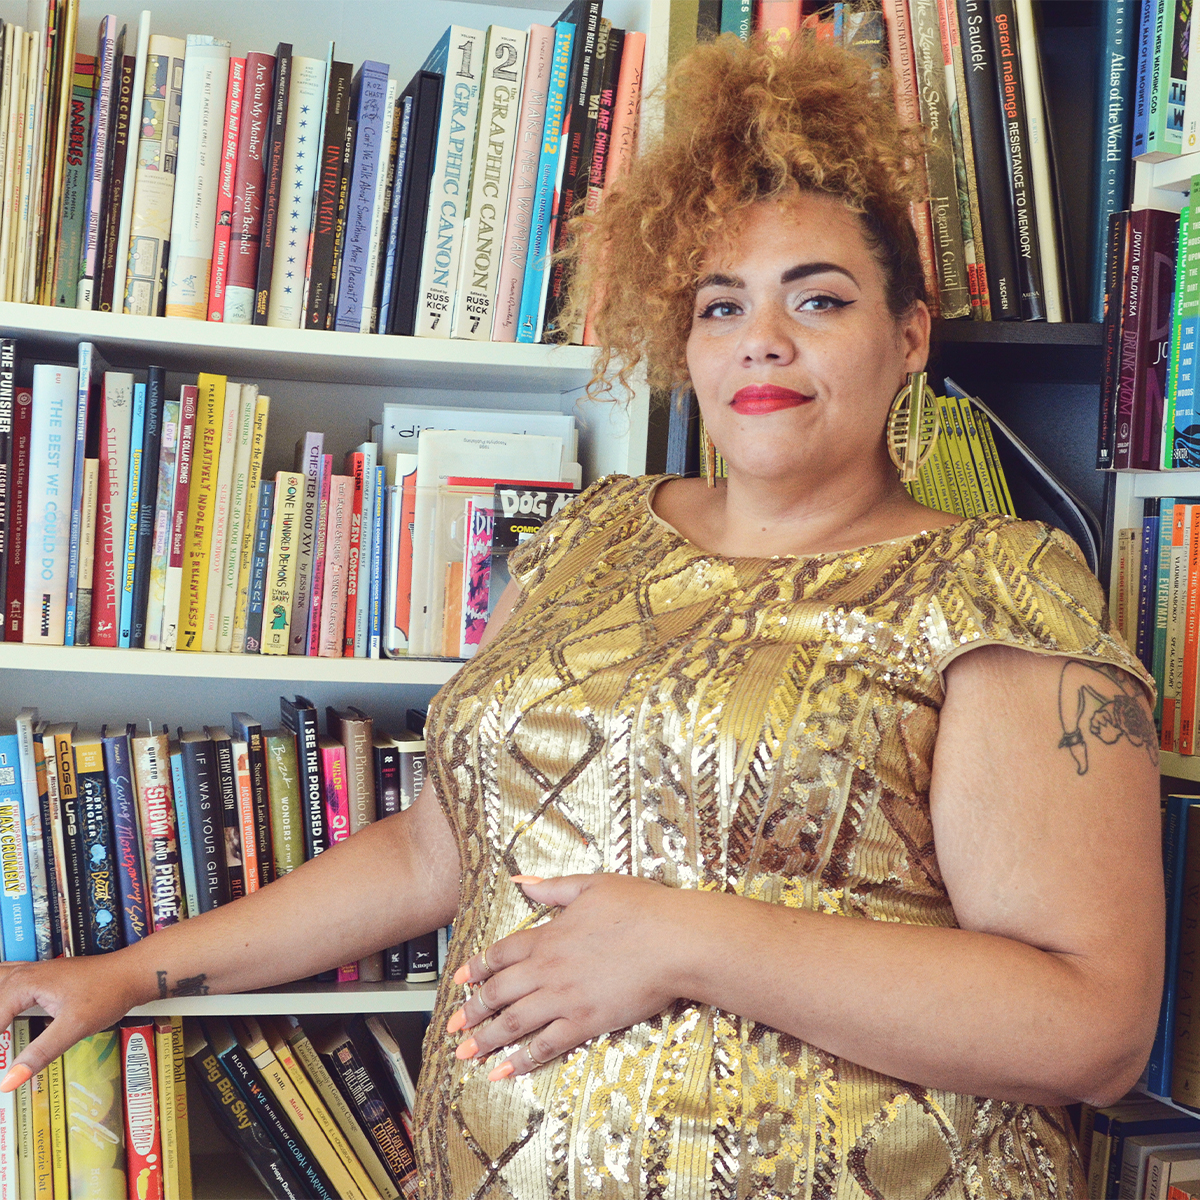 Bianca is a tall fat light skinned disabled queer AfraLatina who is in a gold dress with gold beaded geometric designs with a smile on her face and looking at the camera. Her hair is up and her blondish brown curls cascade around her head. She has on red lipstick and large round gold earrings. She stands in front of a full bookcase.